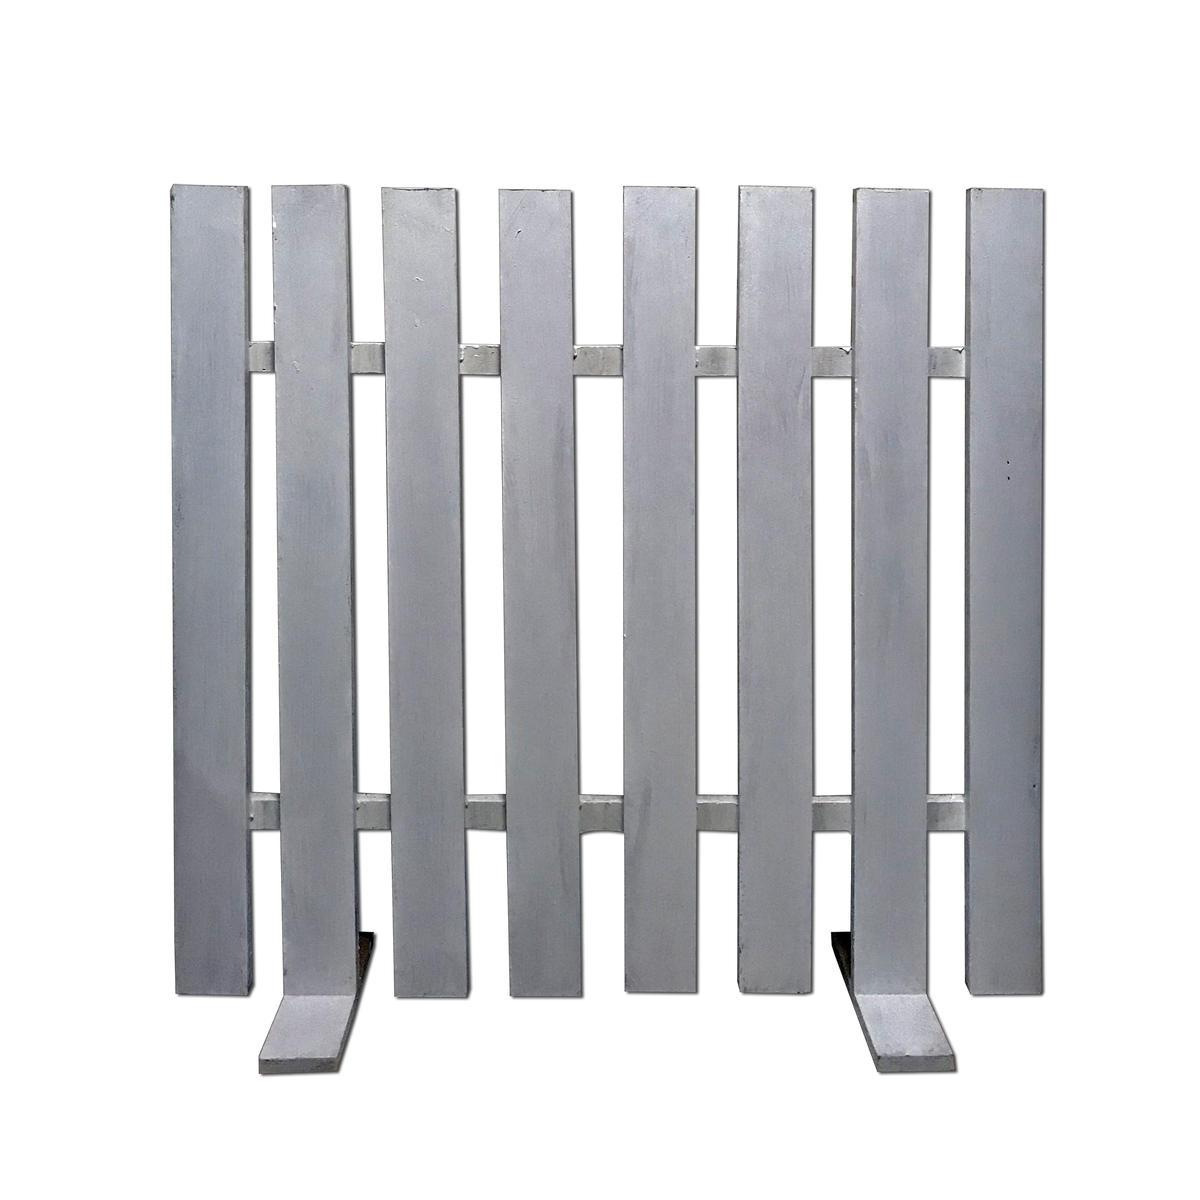 Small White Picket Fence